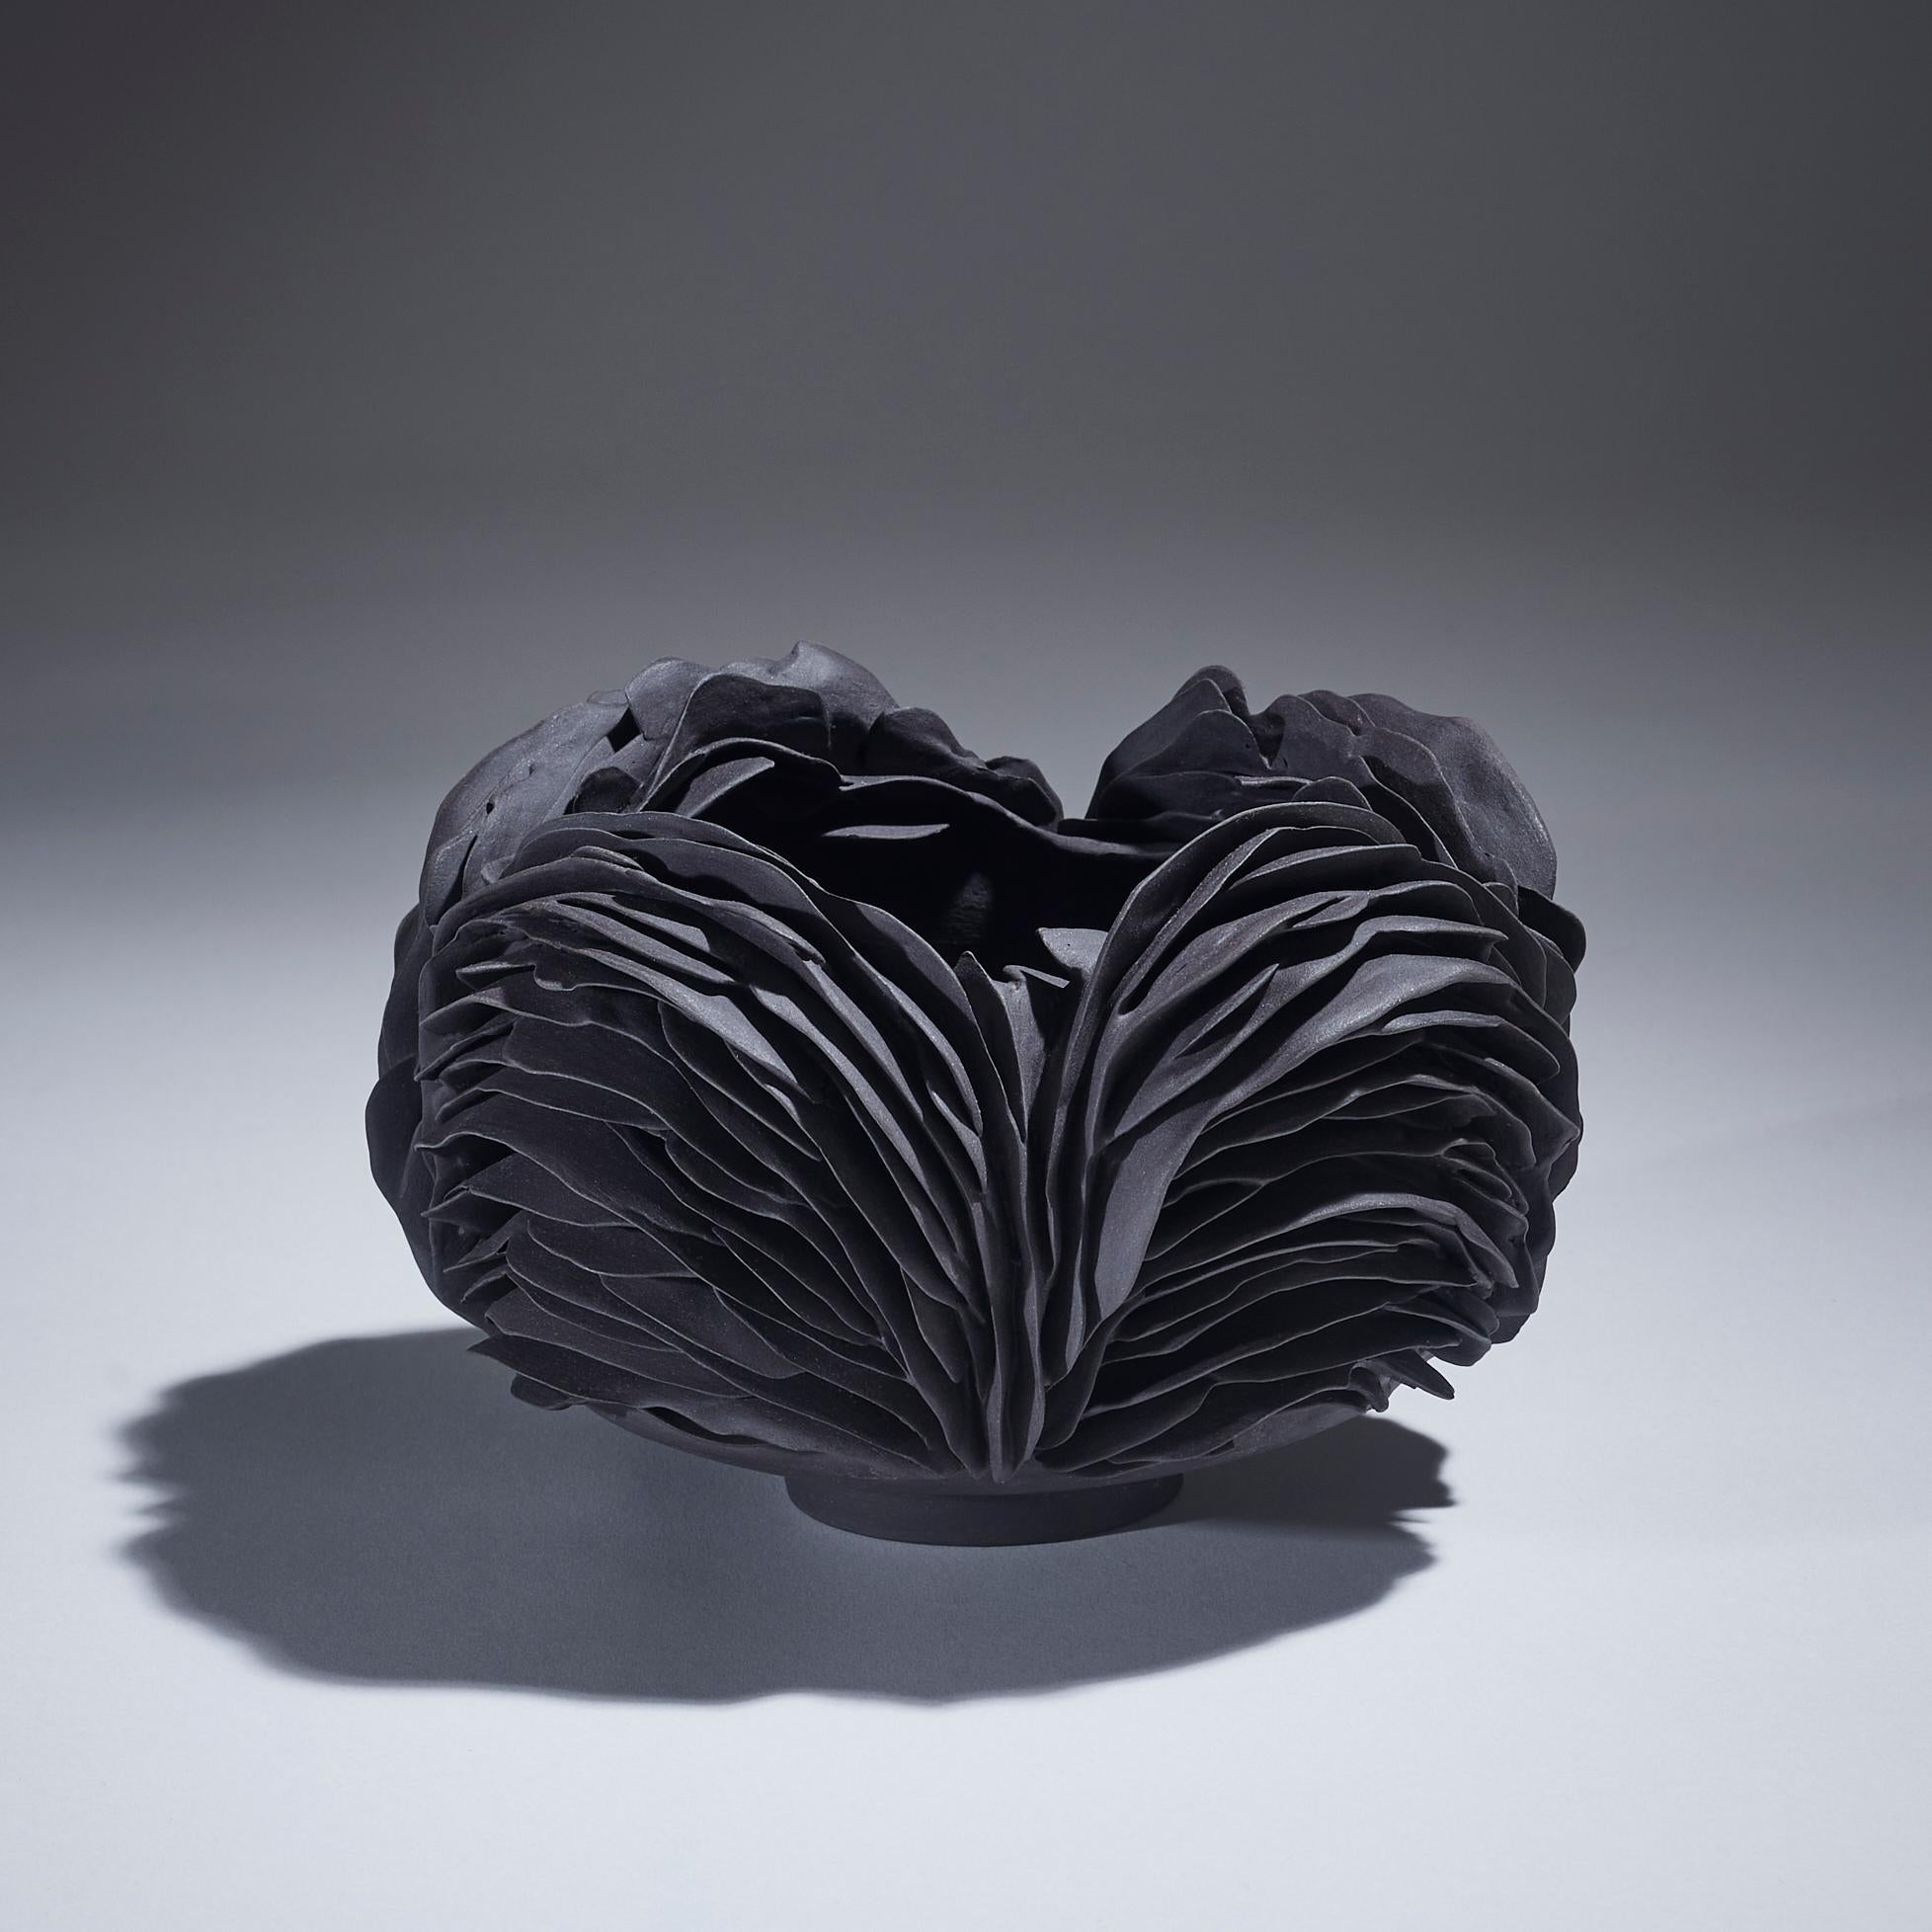 Nest II, 2022 (Porcelain, C. 4.3 in. H x 7 in. W x 7 in. D., Object No.: 3925)

Olivia Walker works in porcelain to create pieces that explore the symbiotic relationship between growth and decay, as well as the relationship between nature and